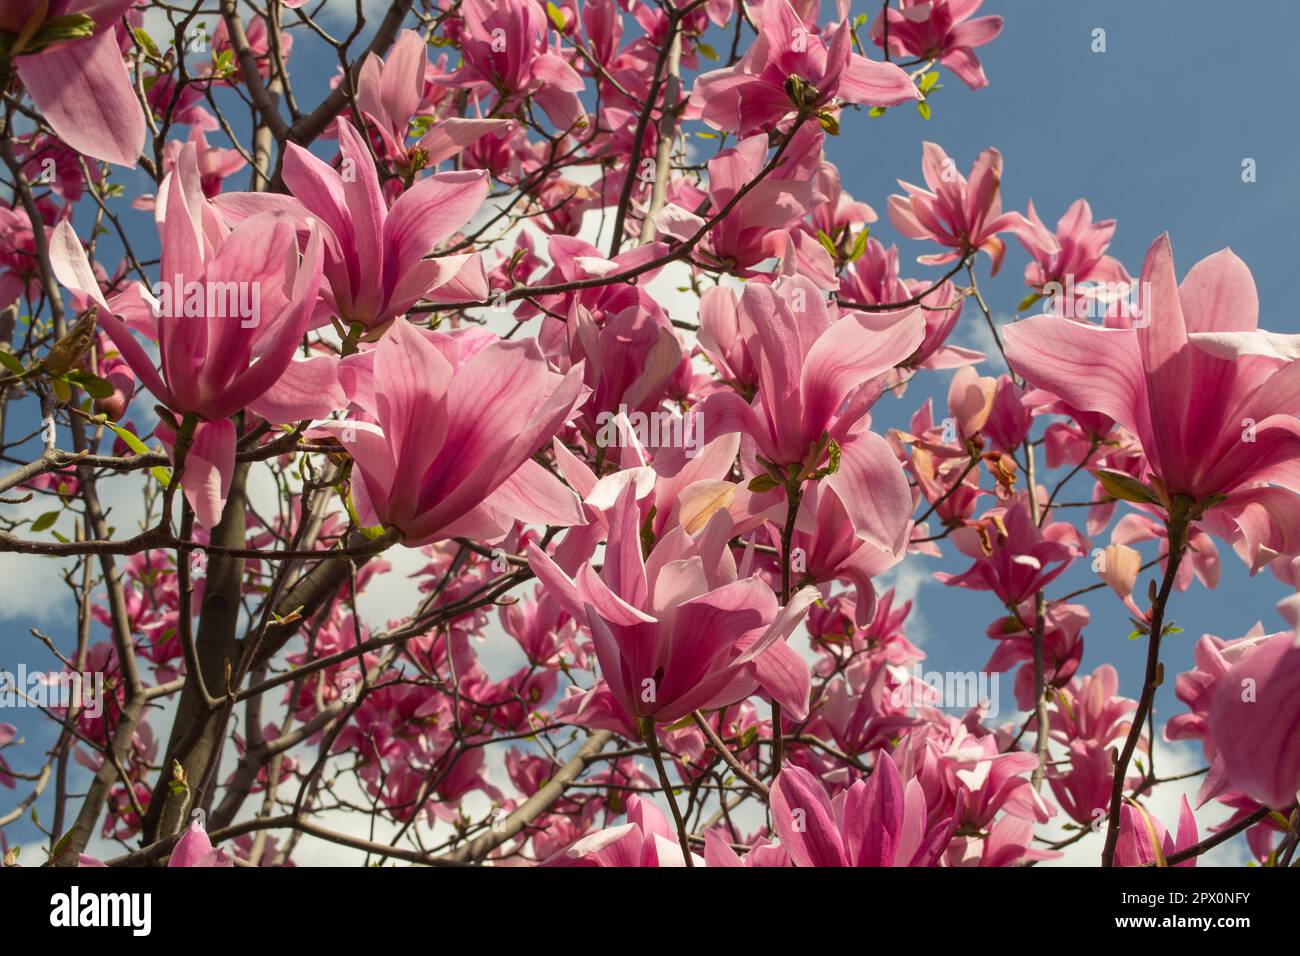 Magnolia soulangeana Flower on a twig blooming against clear blue sky at spring Stock Photo